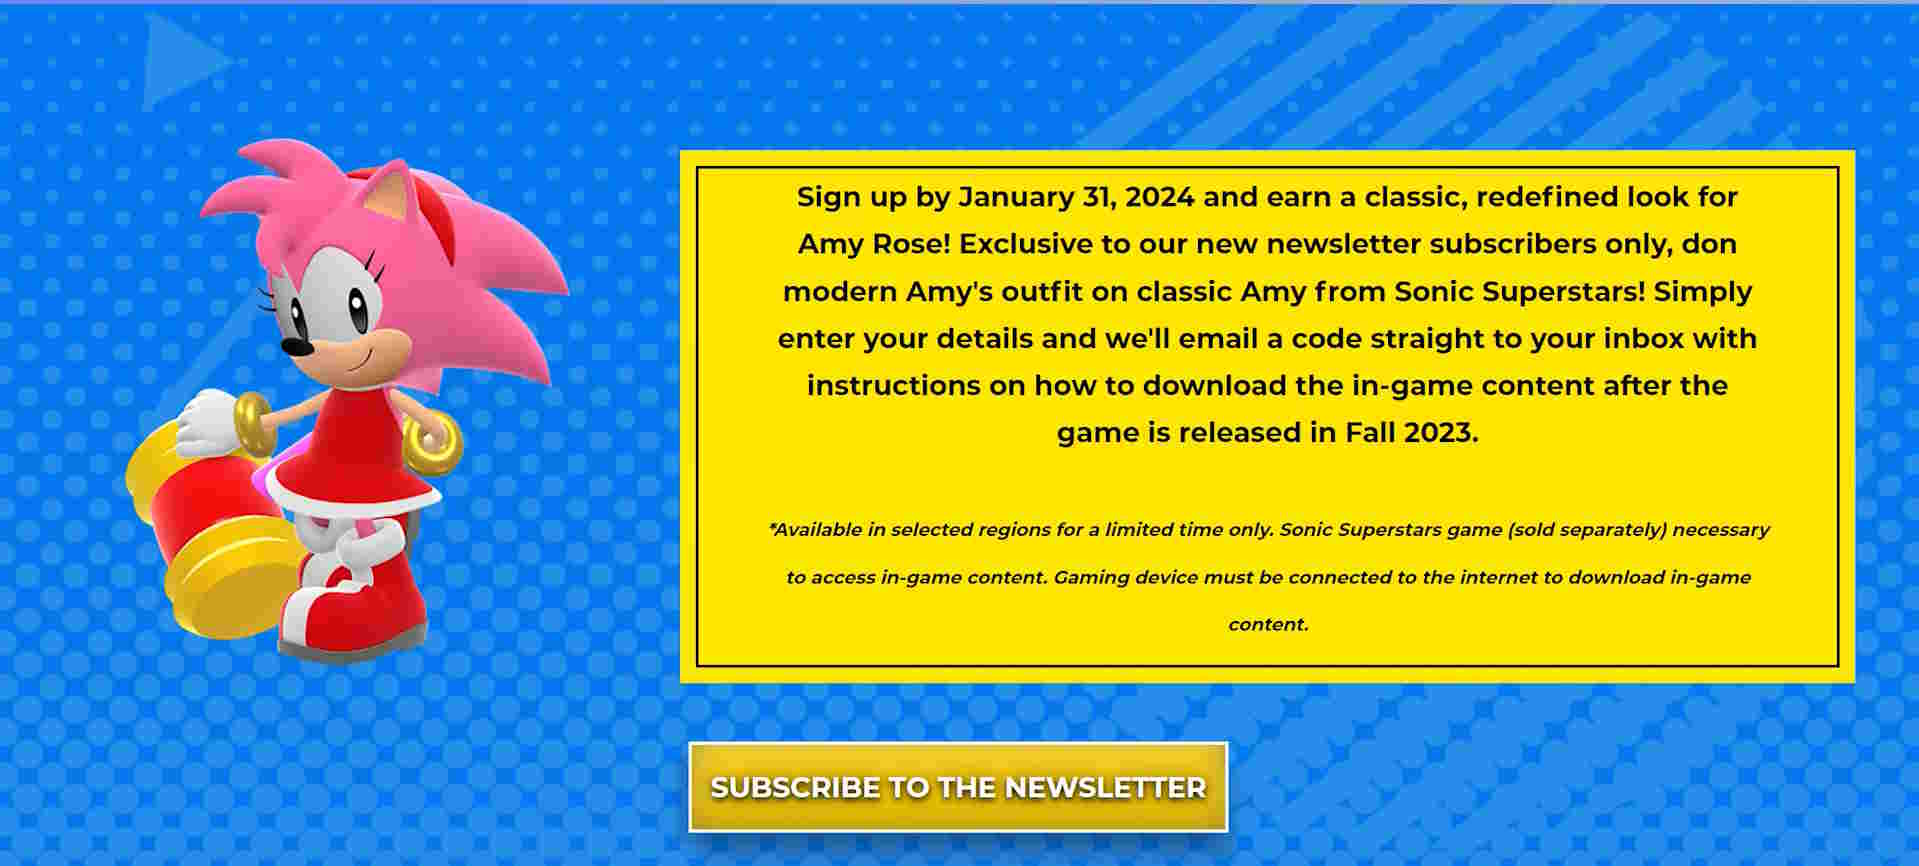 Roblox News, Codes, and Guides - Page 19 of 210 - Gamer Journalist